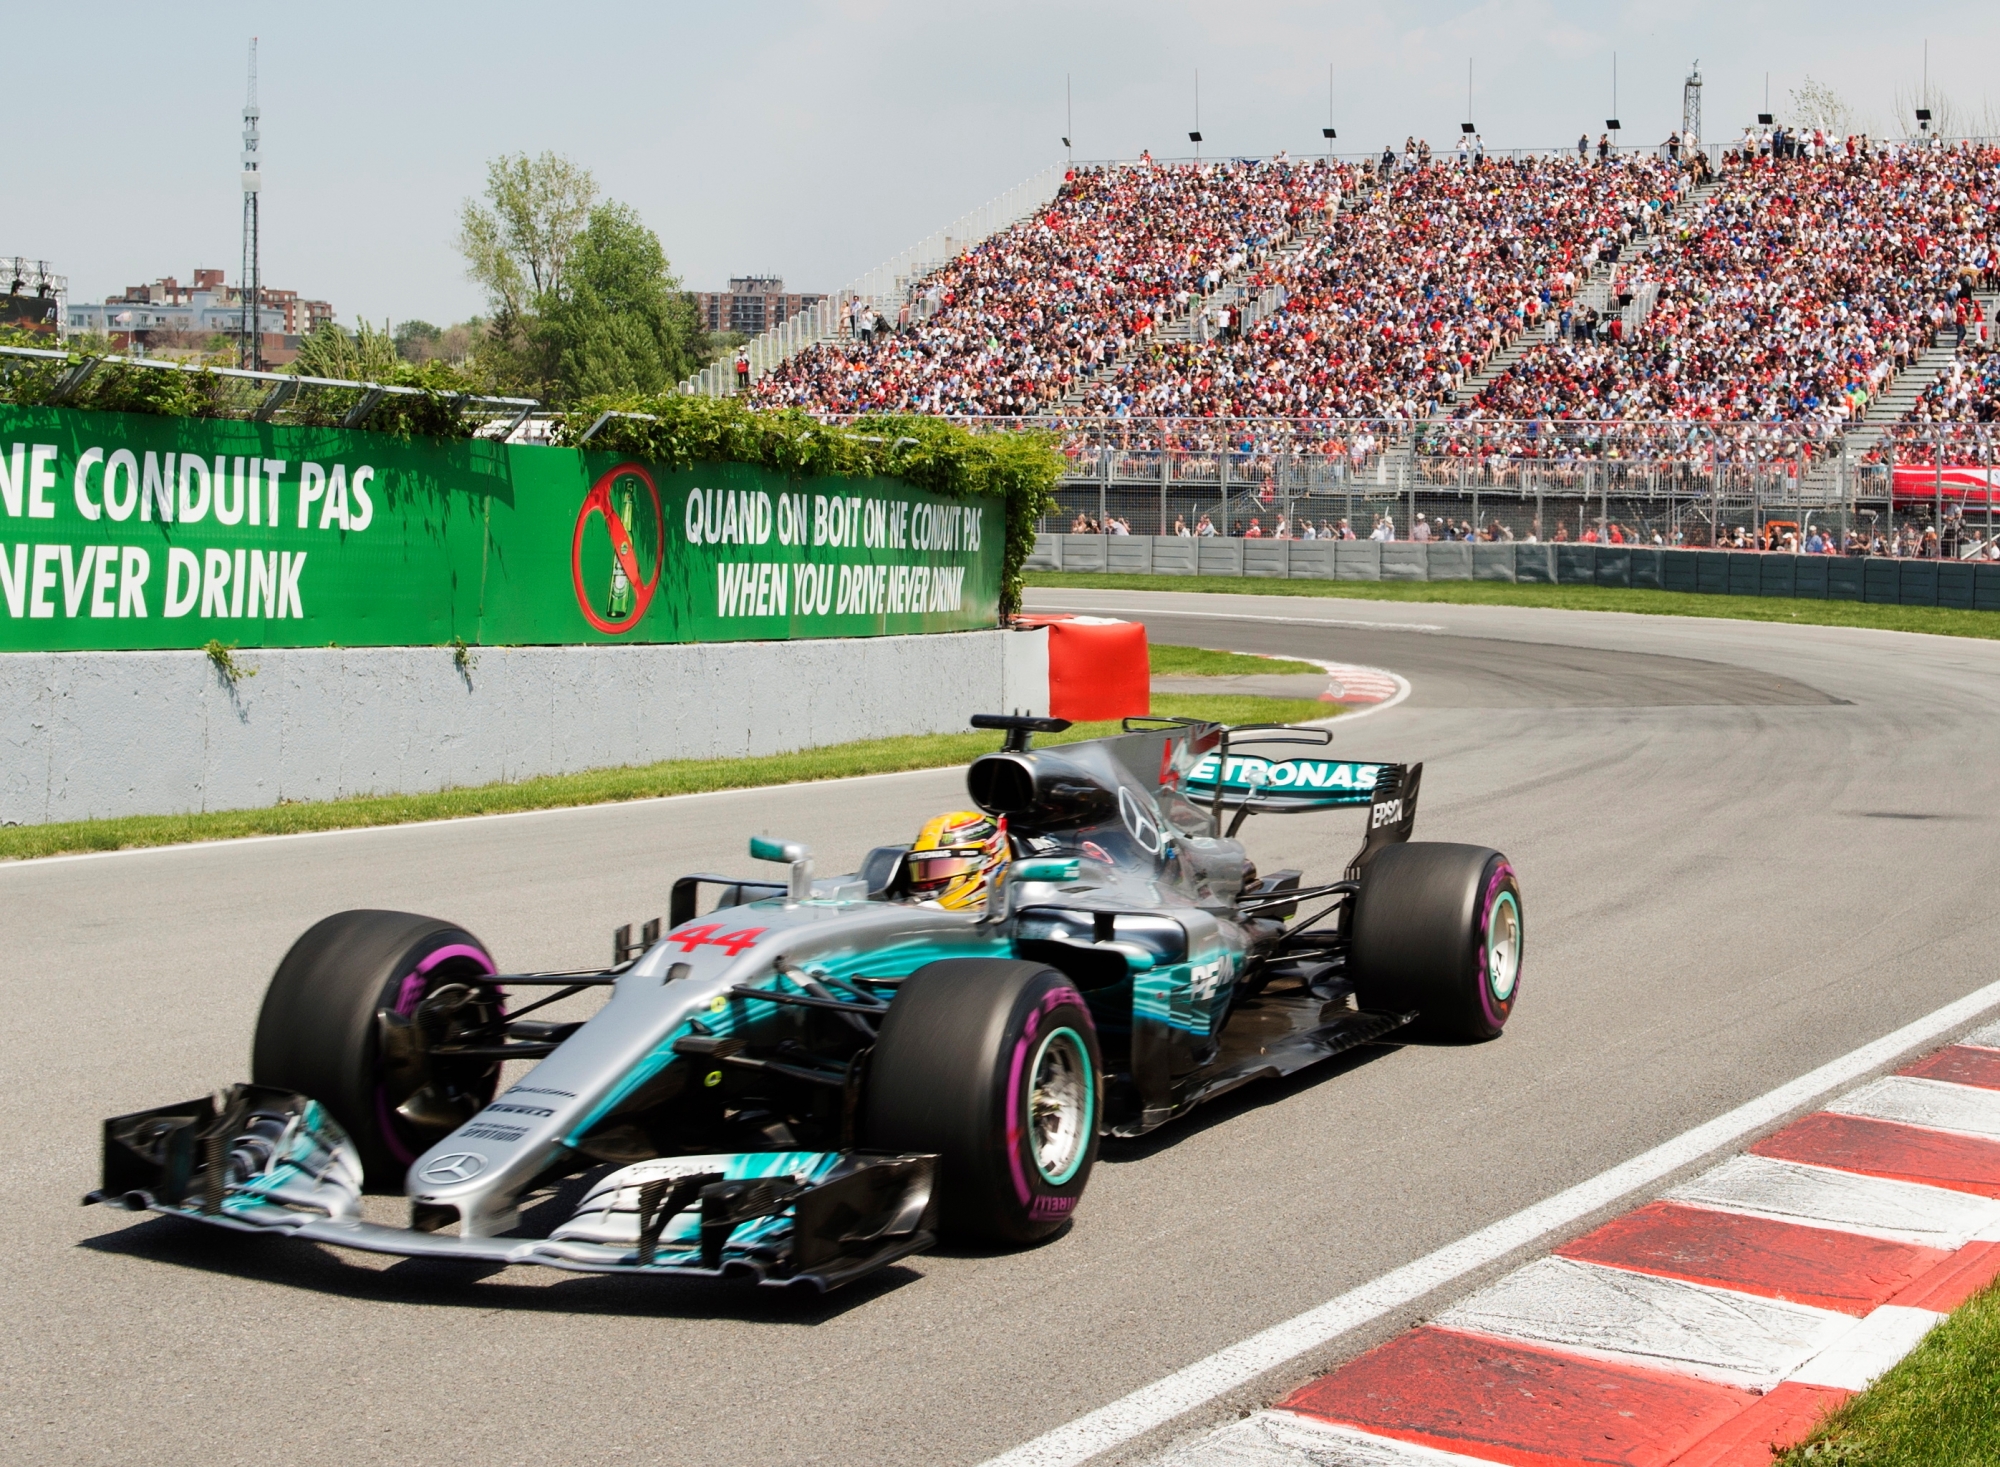 Mercedes driver Lewis Hamilton (44), of Britain, drives through the Senna corner to lead the Canadian Grand Prix, Sunday, June 11, 2017 in Montreal. (Ryan Remiorz/The Canadian Press via AP) F1 Canada Grand Prix Auto Racing